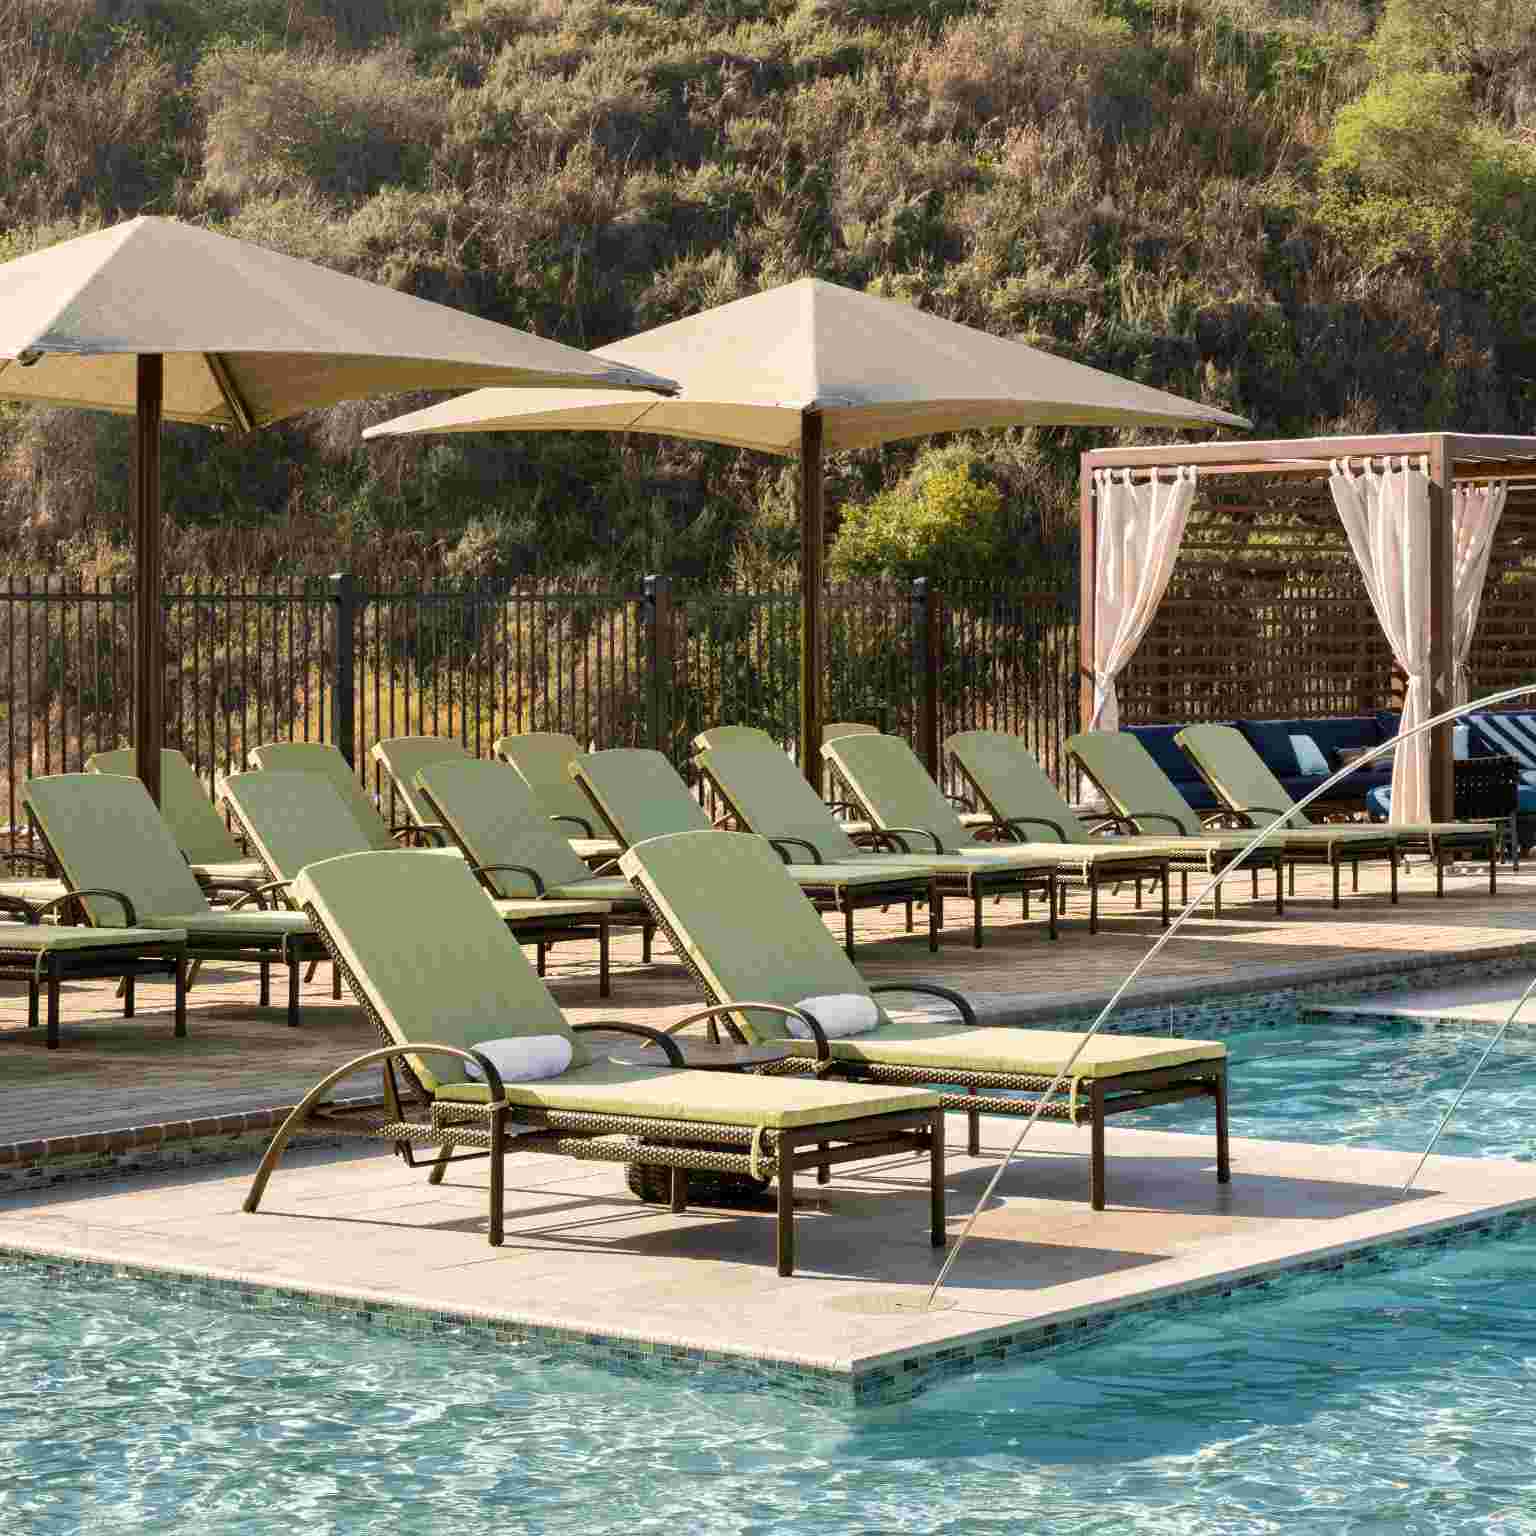 rows of beach loungers and cabanas surround a sparkeling pool with water features.